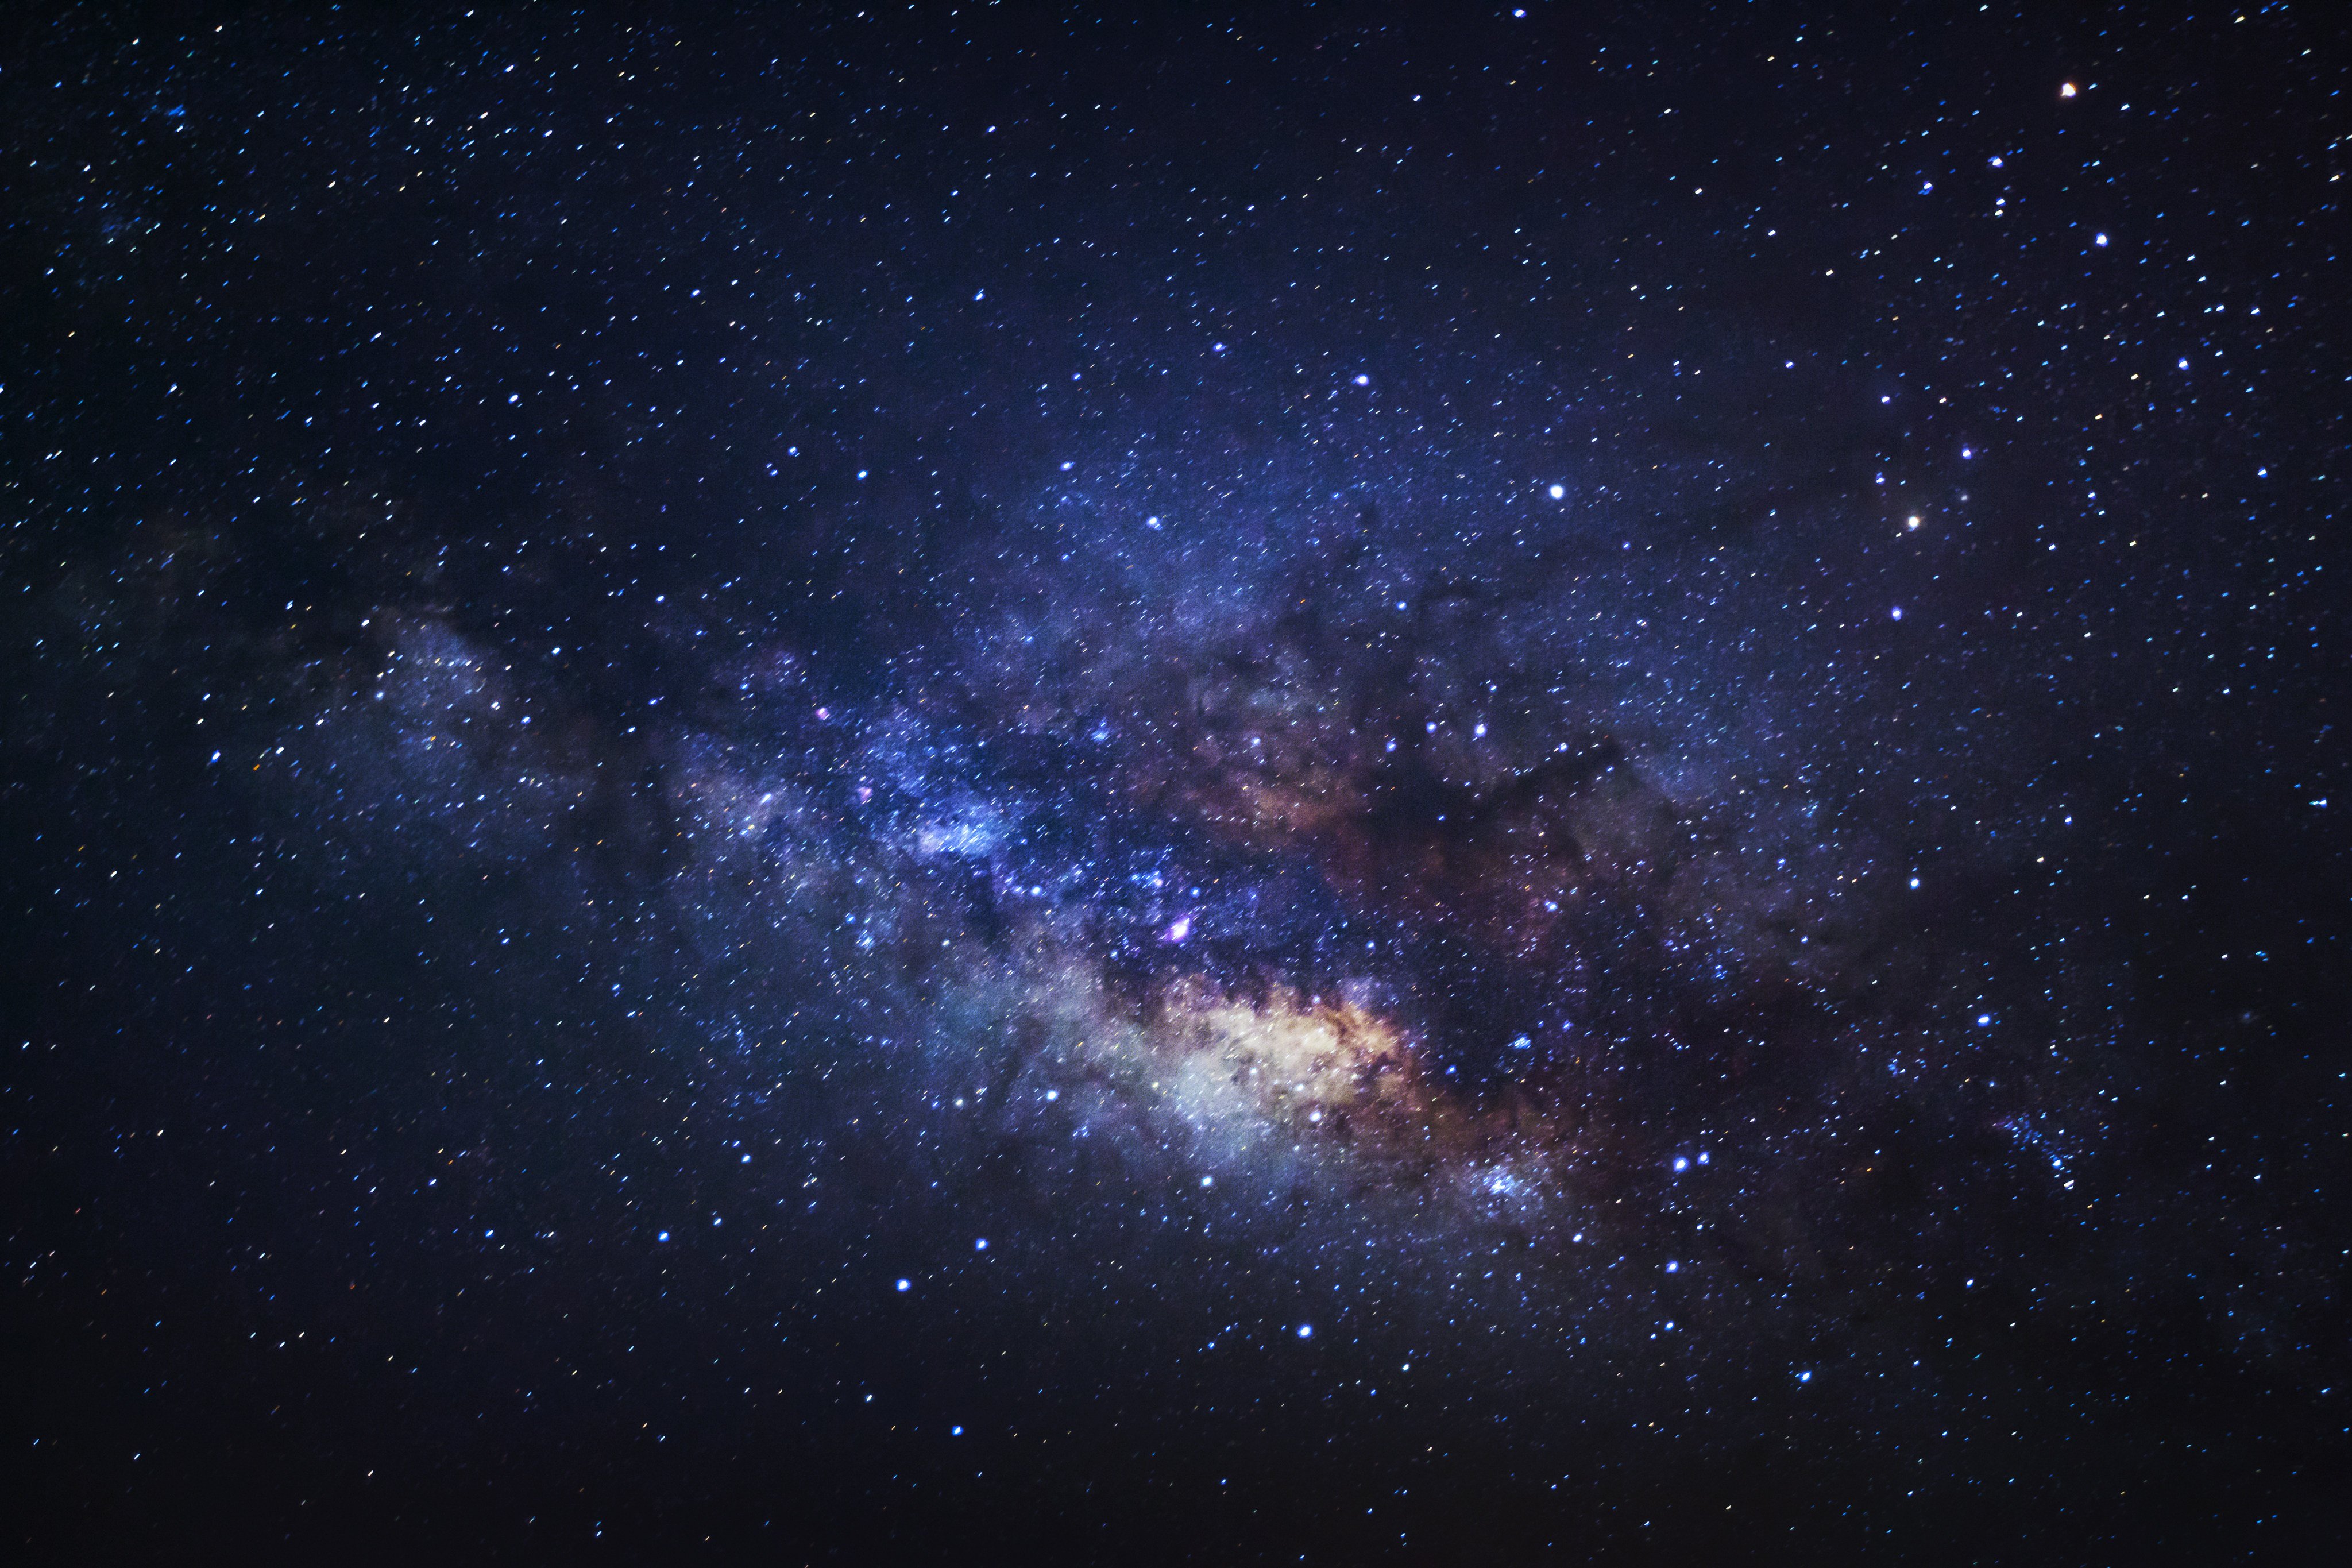 Earth’s solar system is within the Milky Way galaxy. Photo: Shutterstock